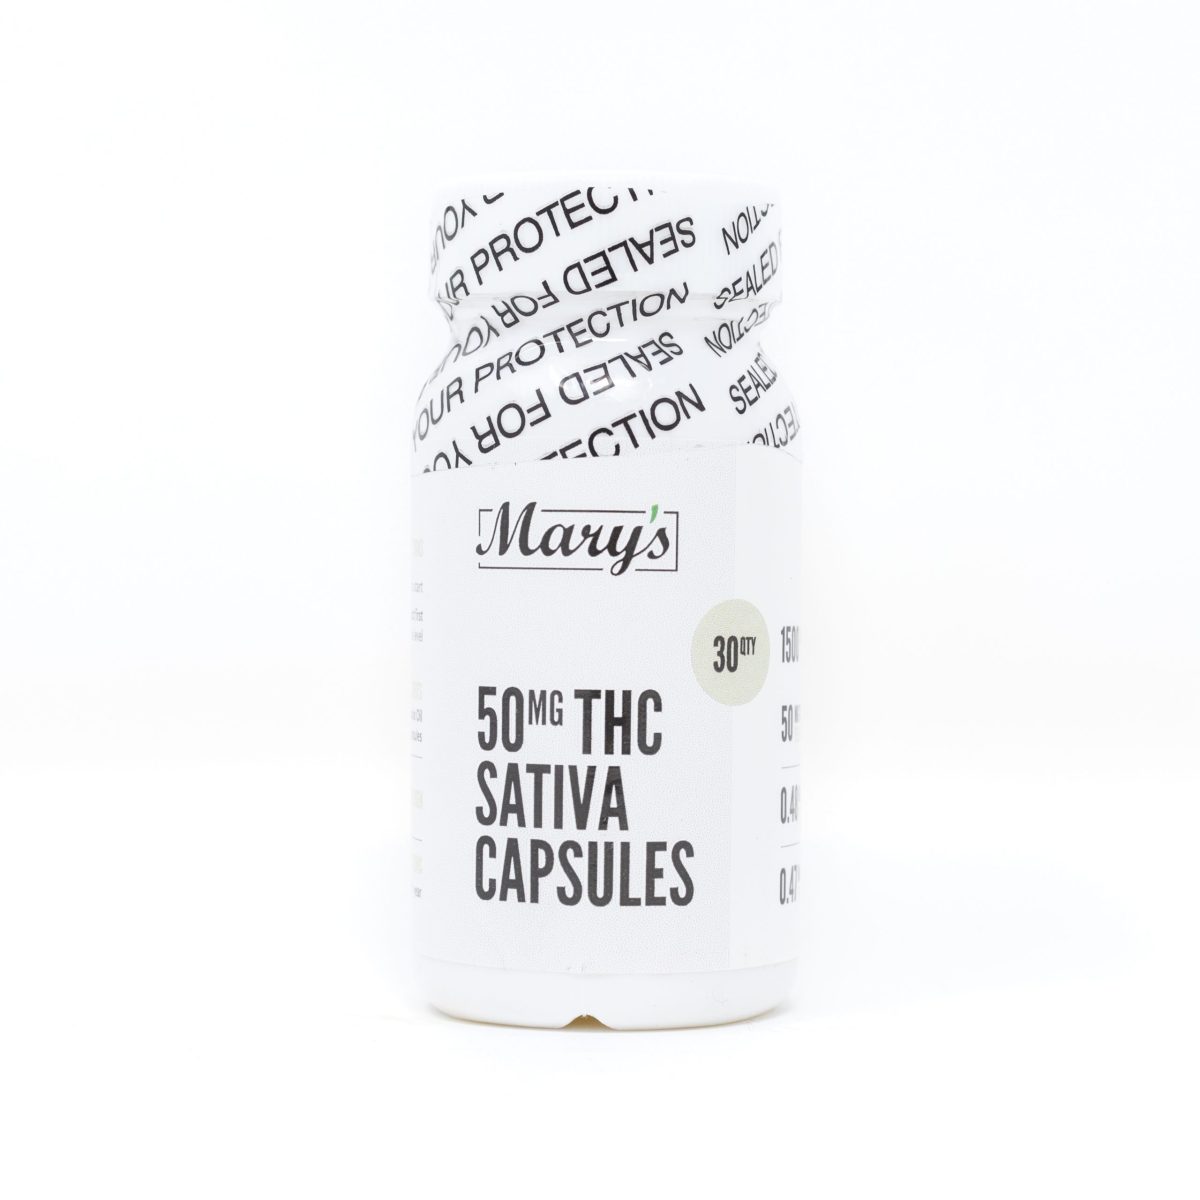 Buy Mary's Medibles - THC Capsules 50MG (SATIVA) at MMJ Express Online Shop